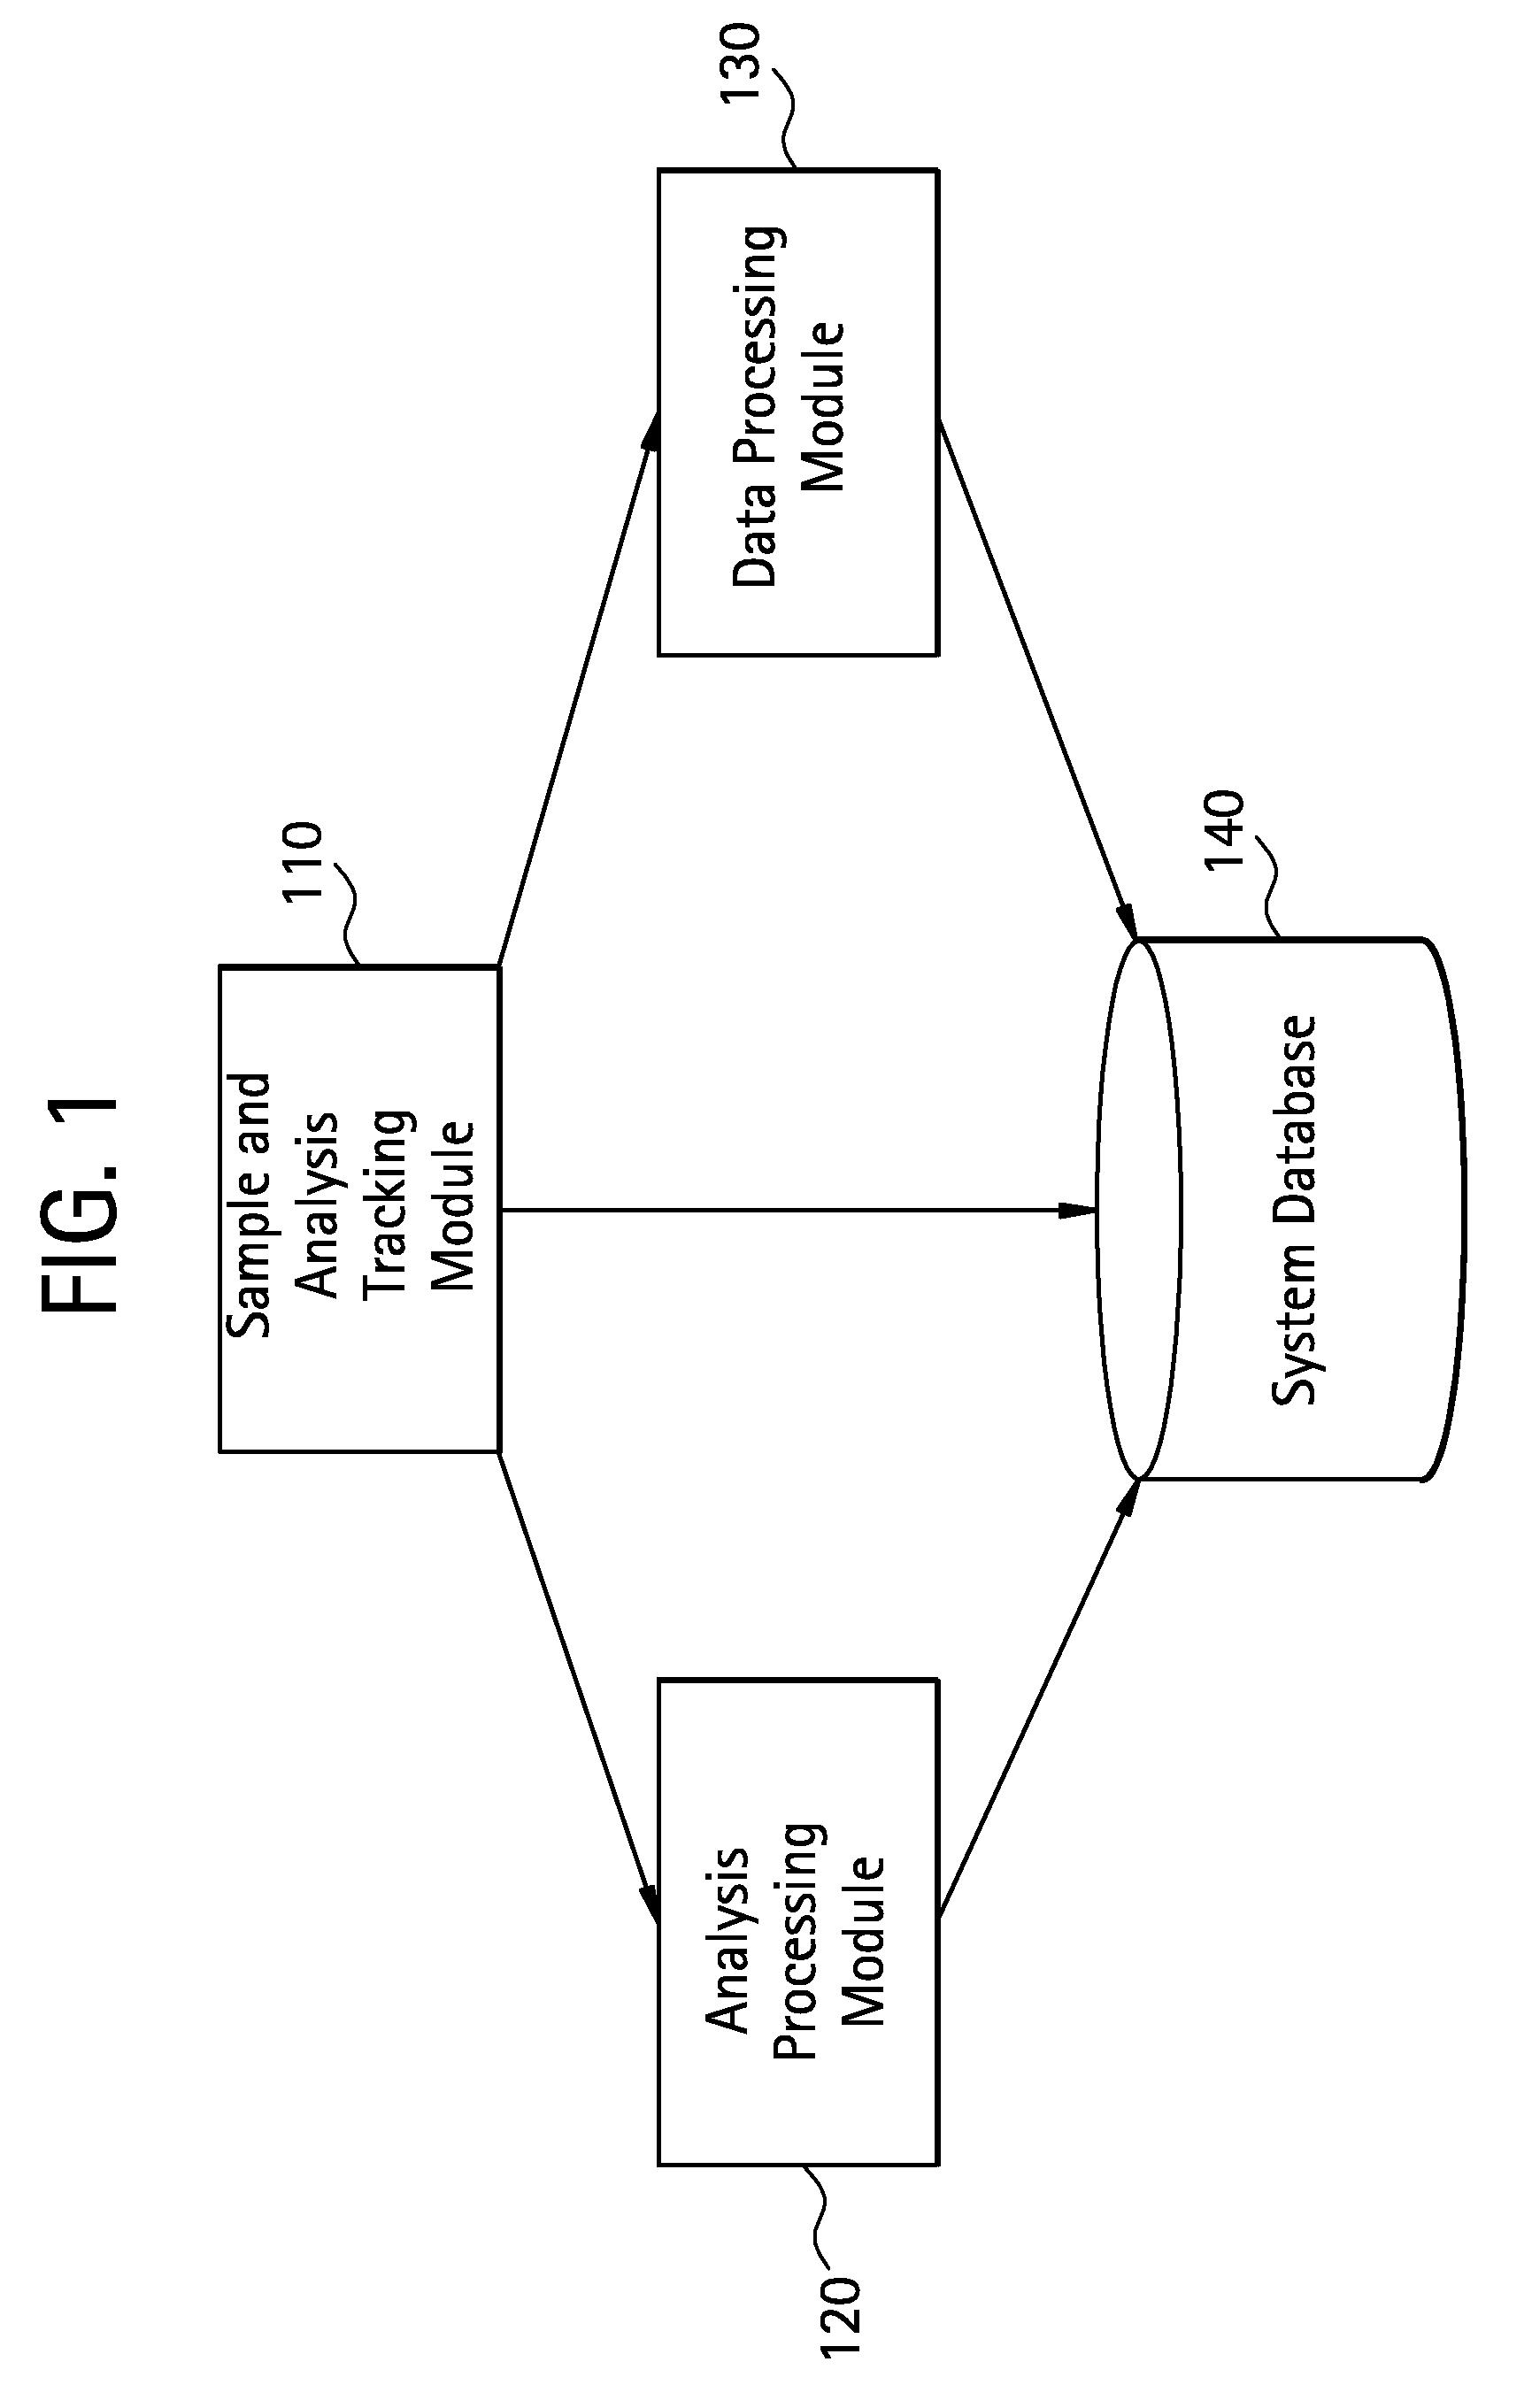 System and method for the non-destructive assessment of the quantitative spatial distribution of components of a medical device